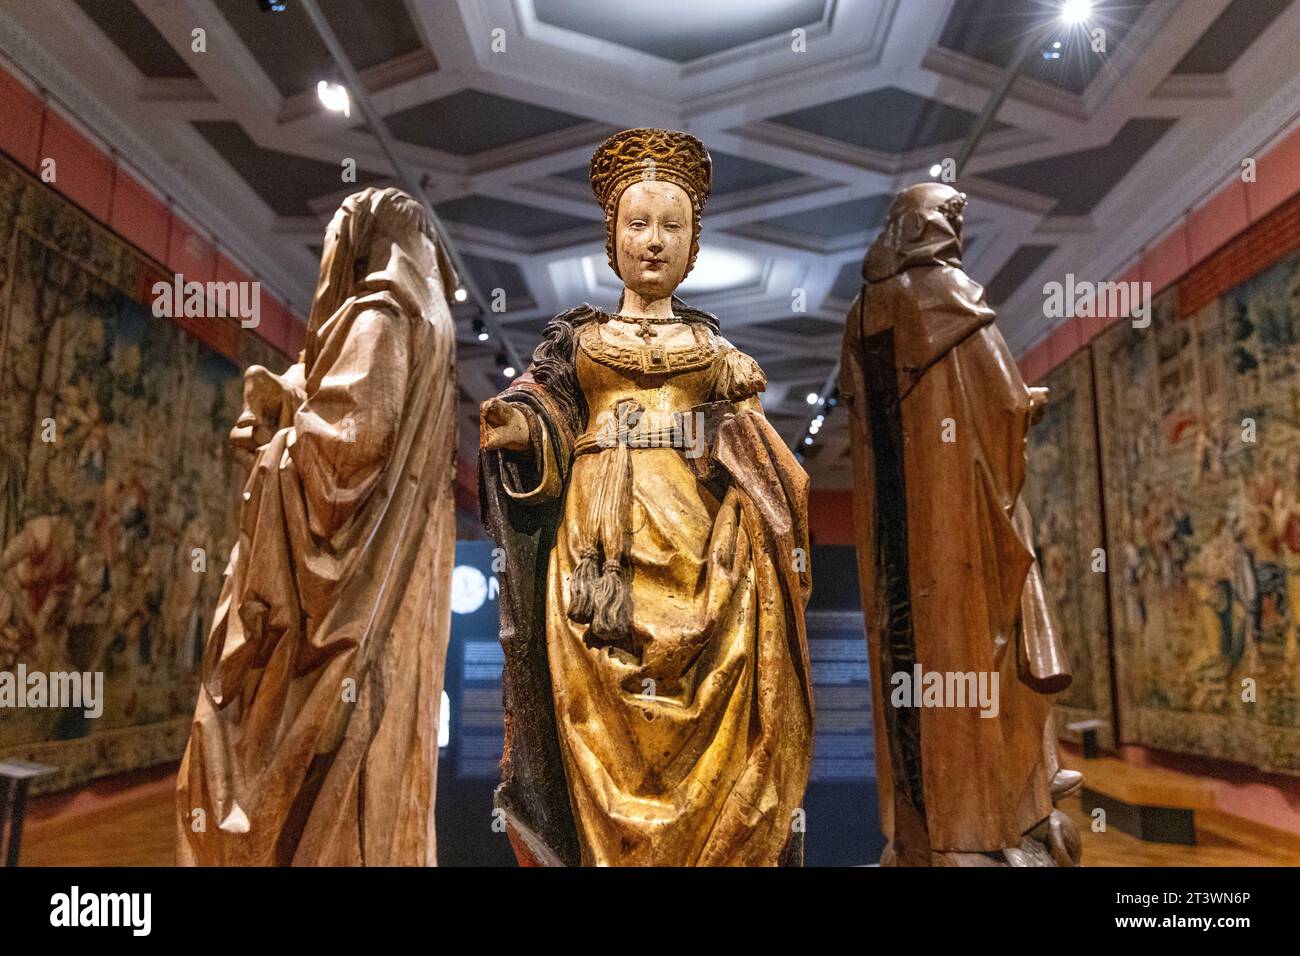 Wooden walnut 16th century statue of Saint Magdalene (Saint Odilia) by Jan van Steffenswert, Royal Museums of Art and History, Brussels, Belgium Stock Photo